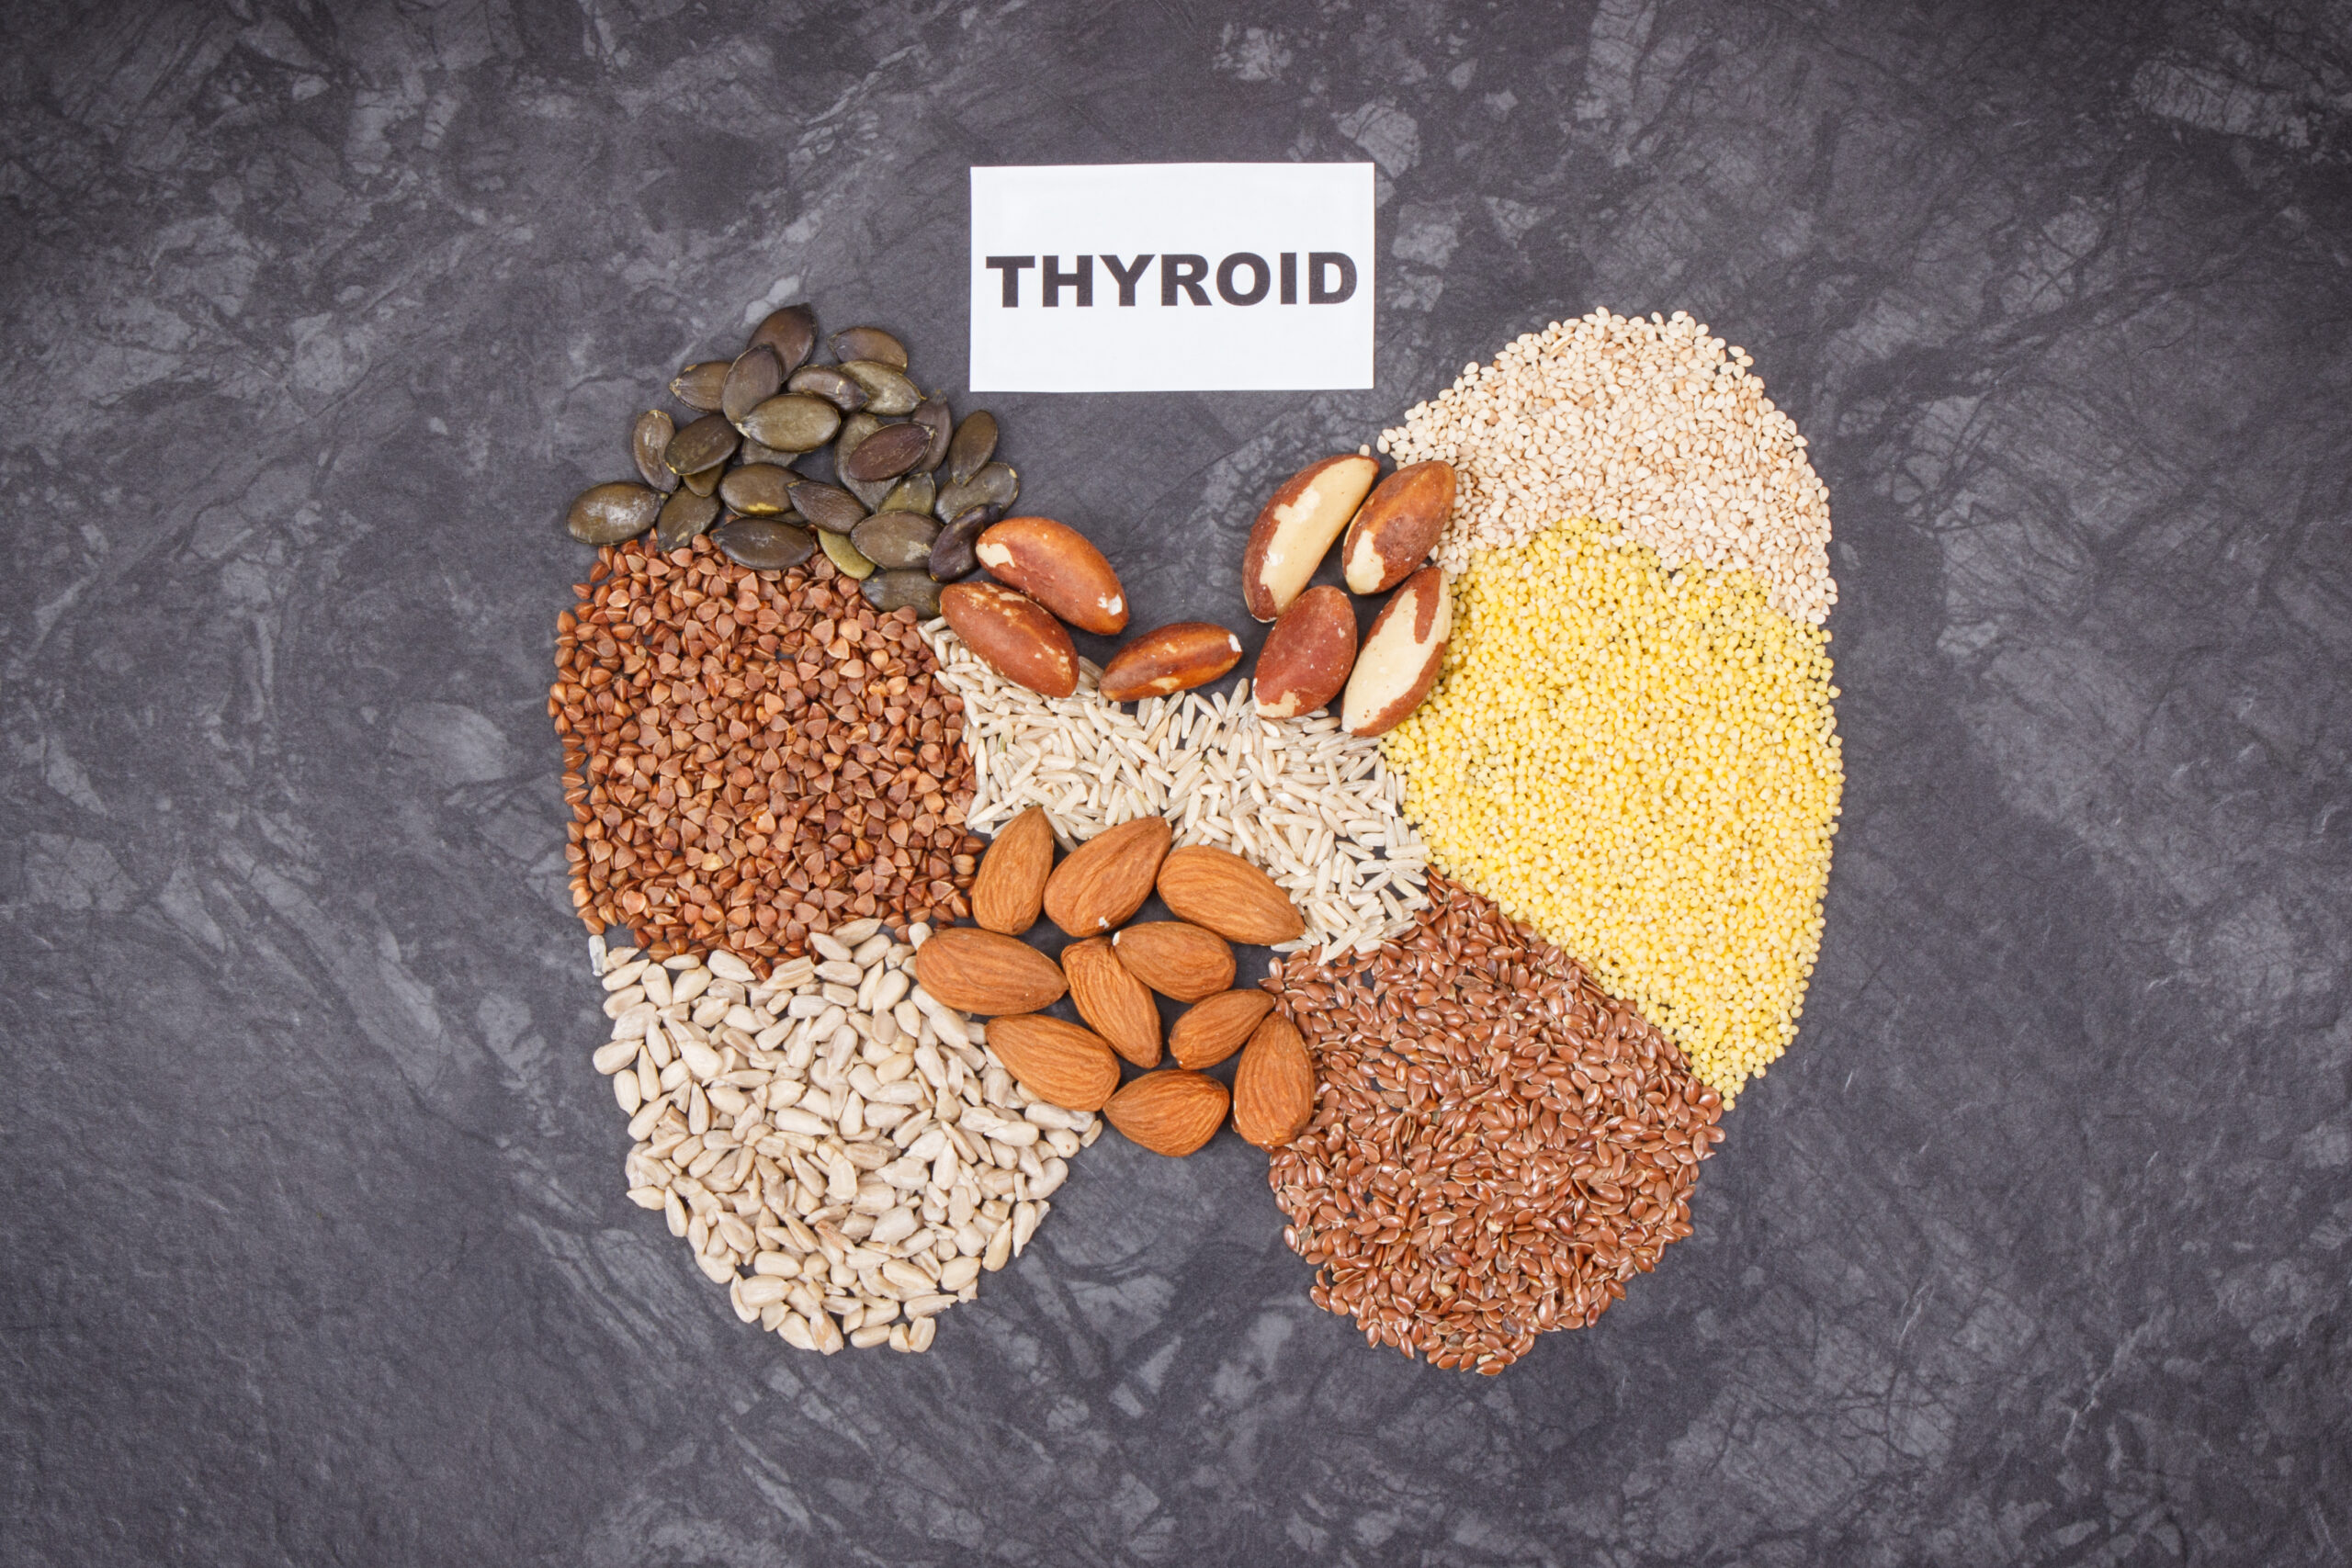 Thyroid shape made of healthy ingredients. Source natural vitamins and minerals